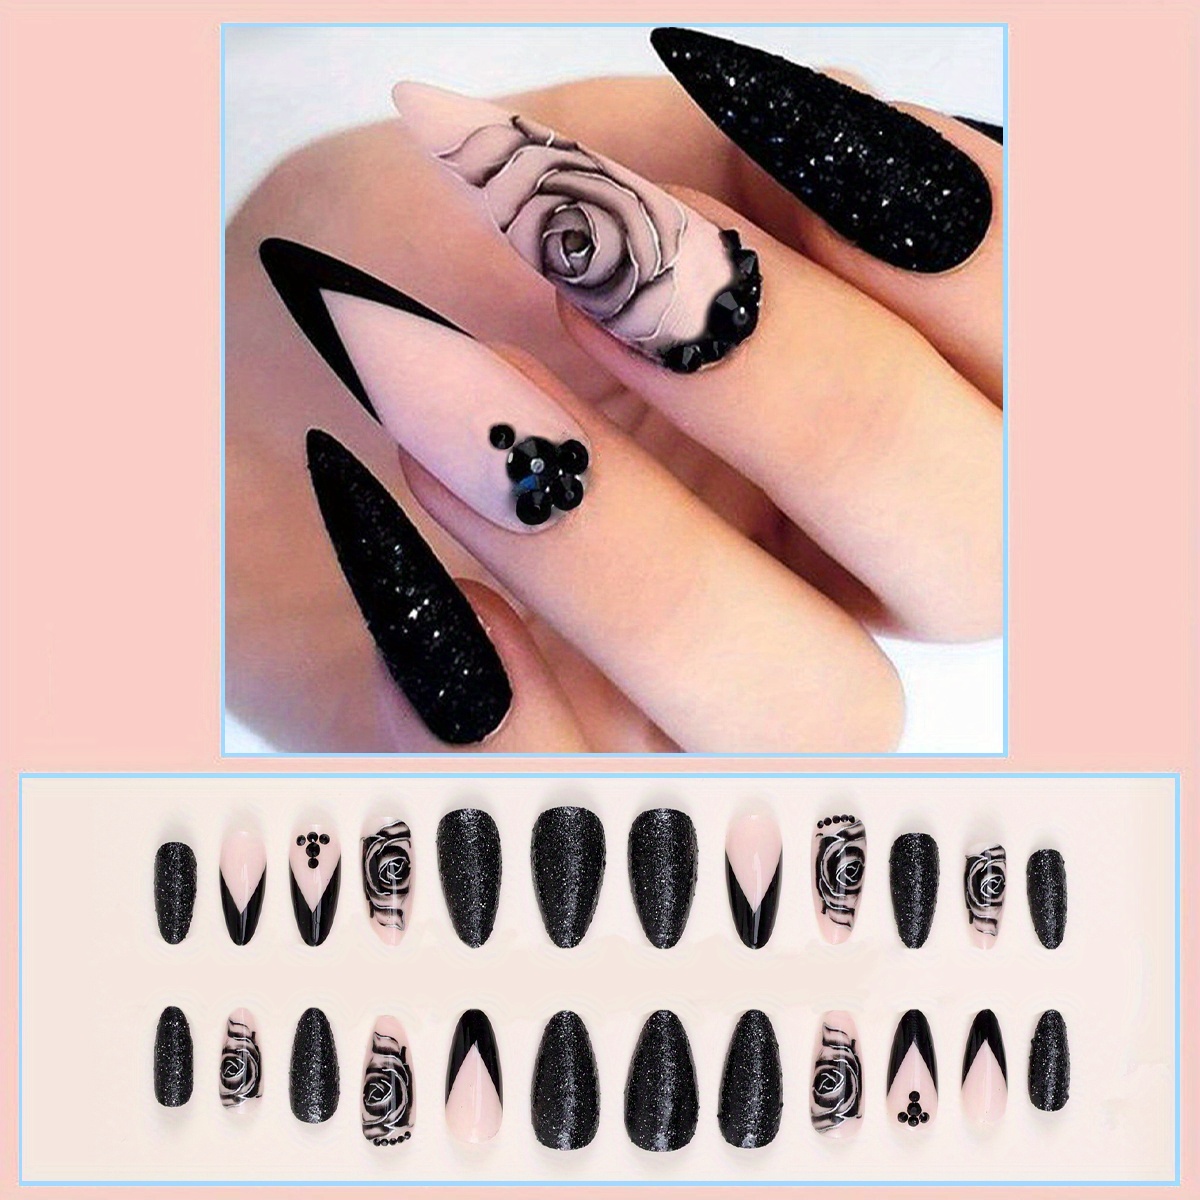 Black Pink With Rhinestones Nail Design on Acrylic Press on Nails